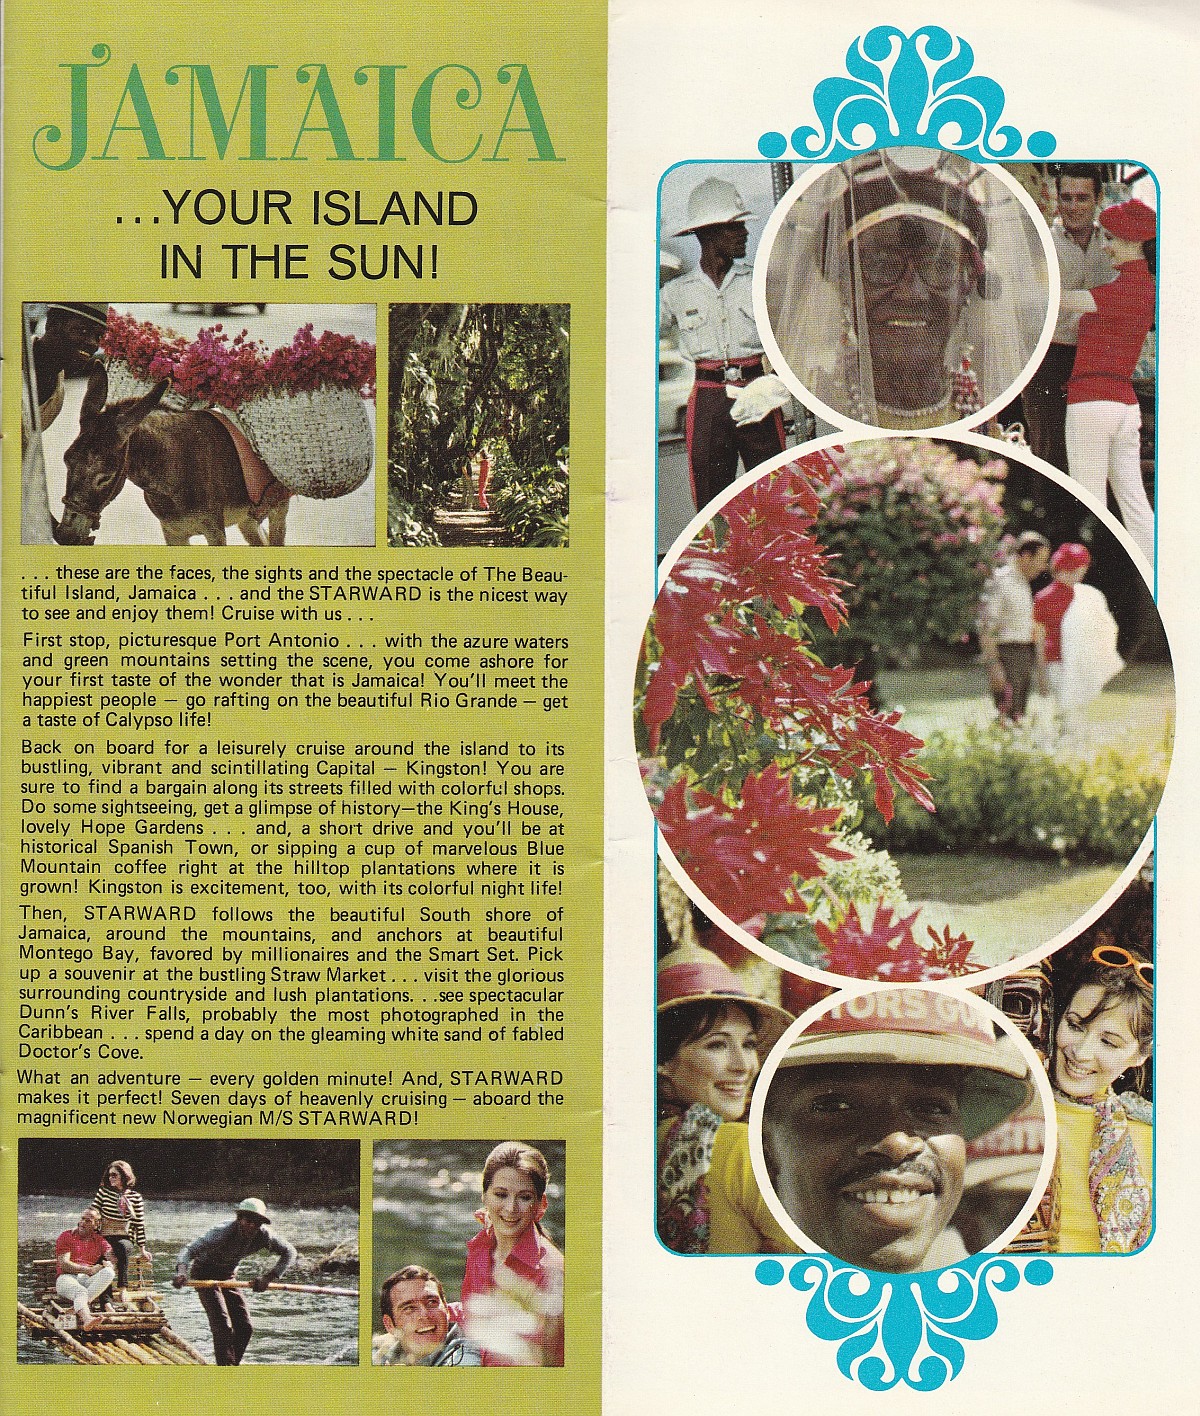 ms Starward Port pictures (cont'd): Jamaica  - your island in the sun!